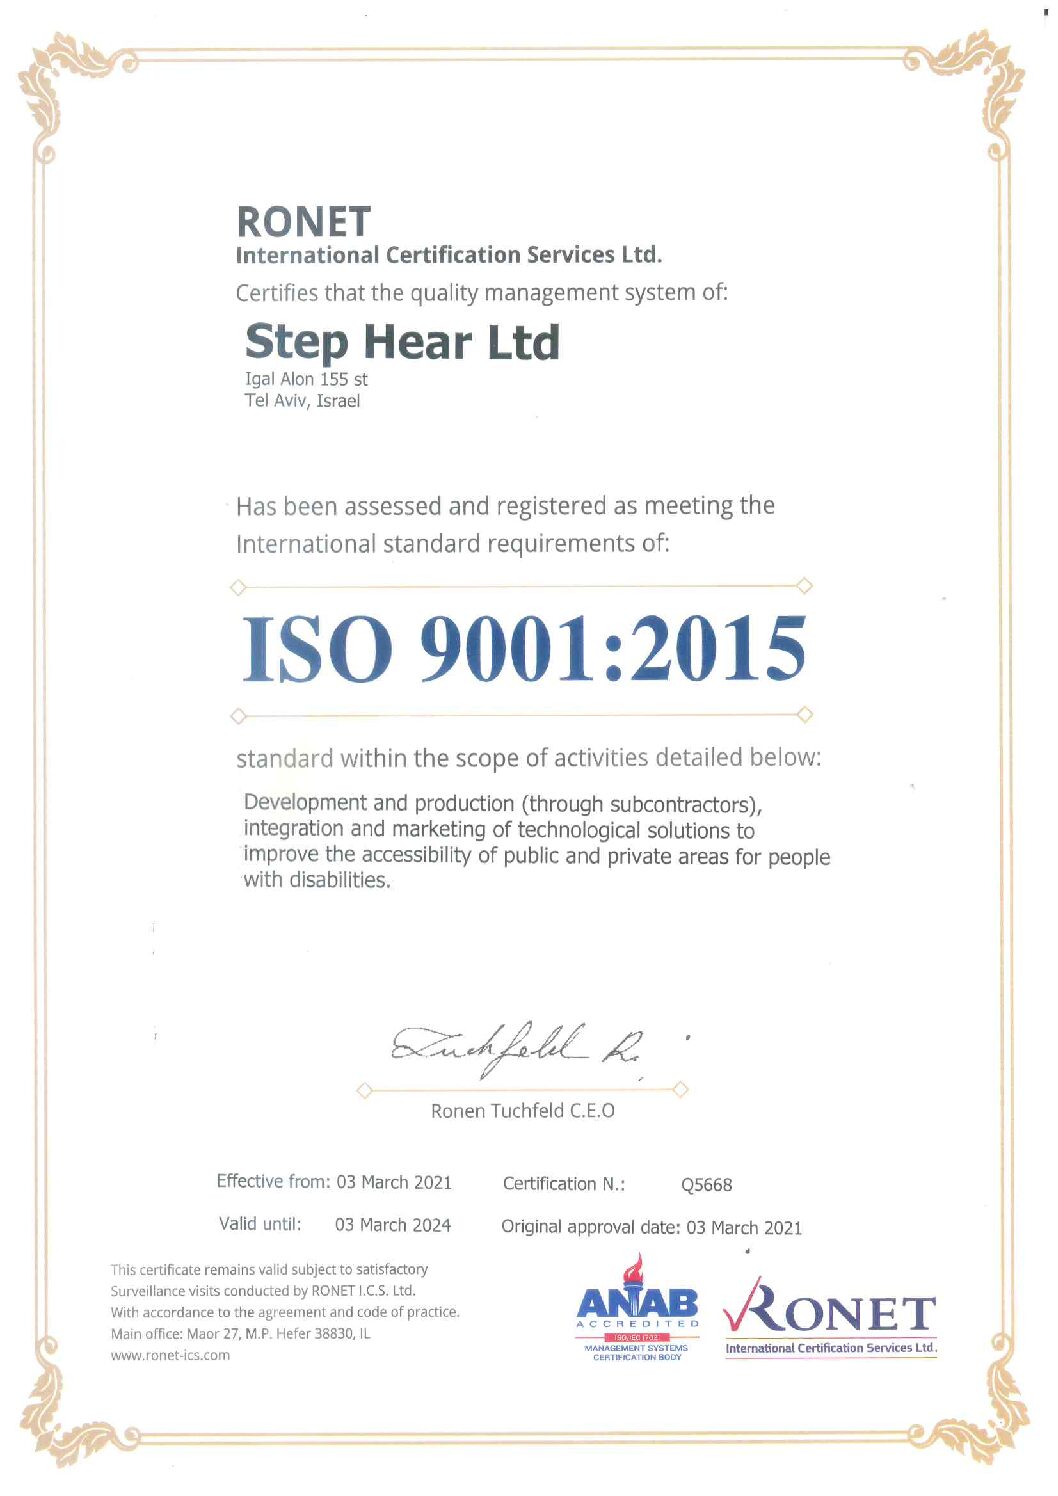 Step-Hear received ISO 9001:2015 Certificate